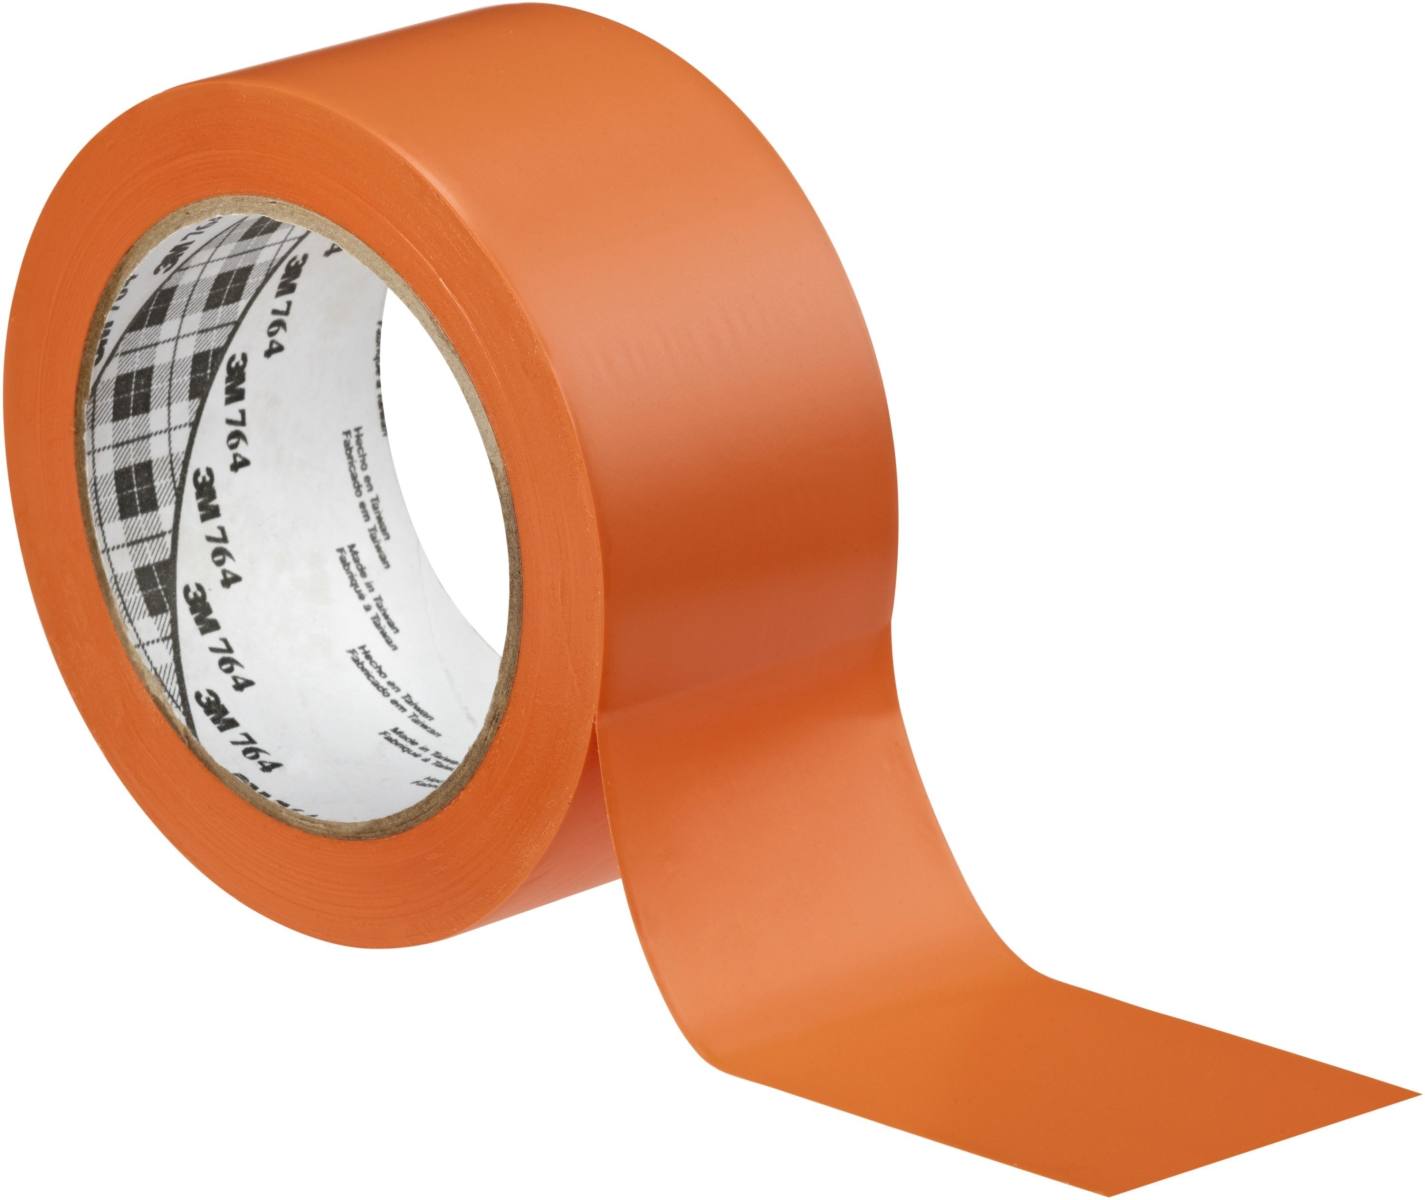 3M All-purpose PVC adhesive tape 764, orange, 50 mm x 33 m, individually packaged for convenience